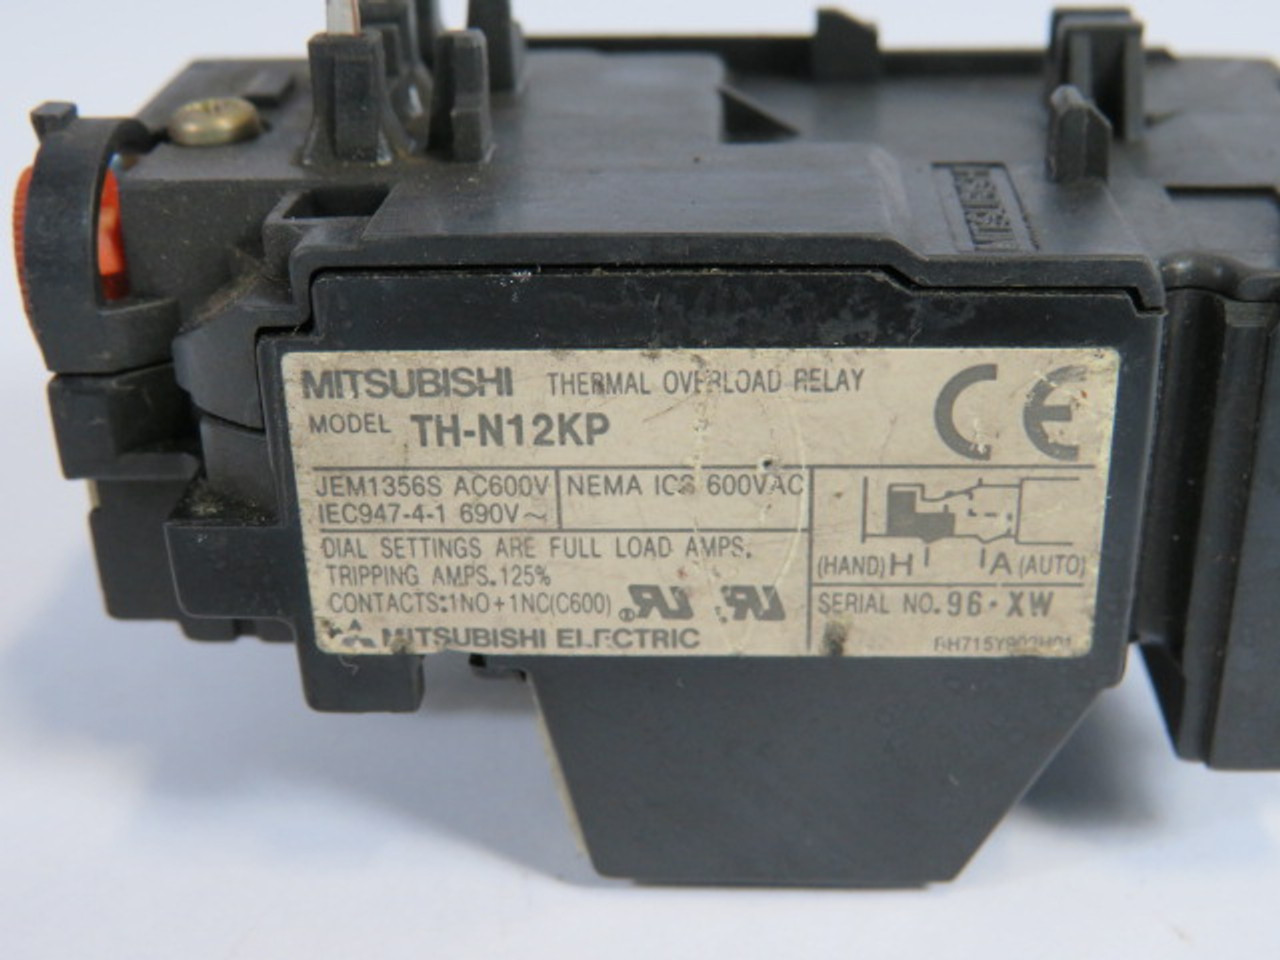 Mitsubishi Electric TH-N12KP Thermal Overload Relay 600VAC 7-11A USED